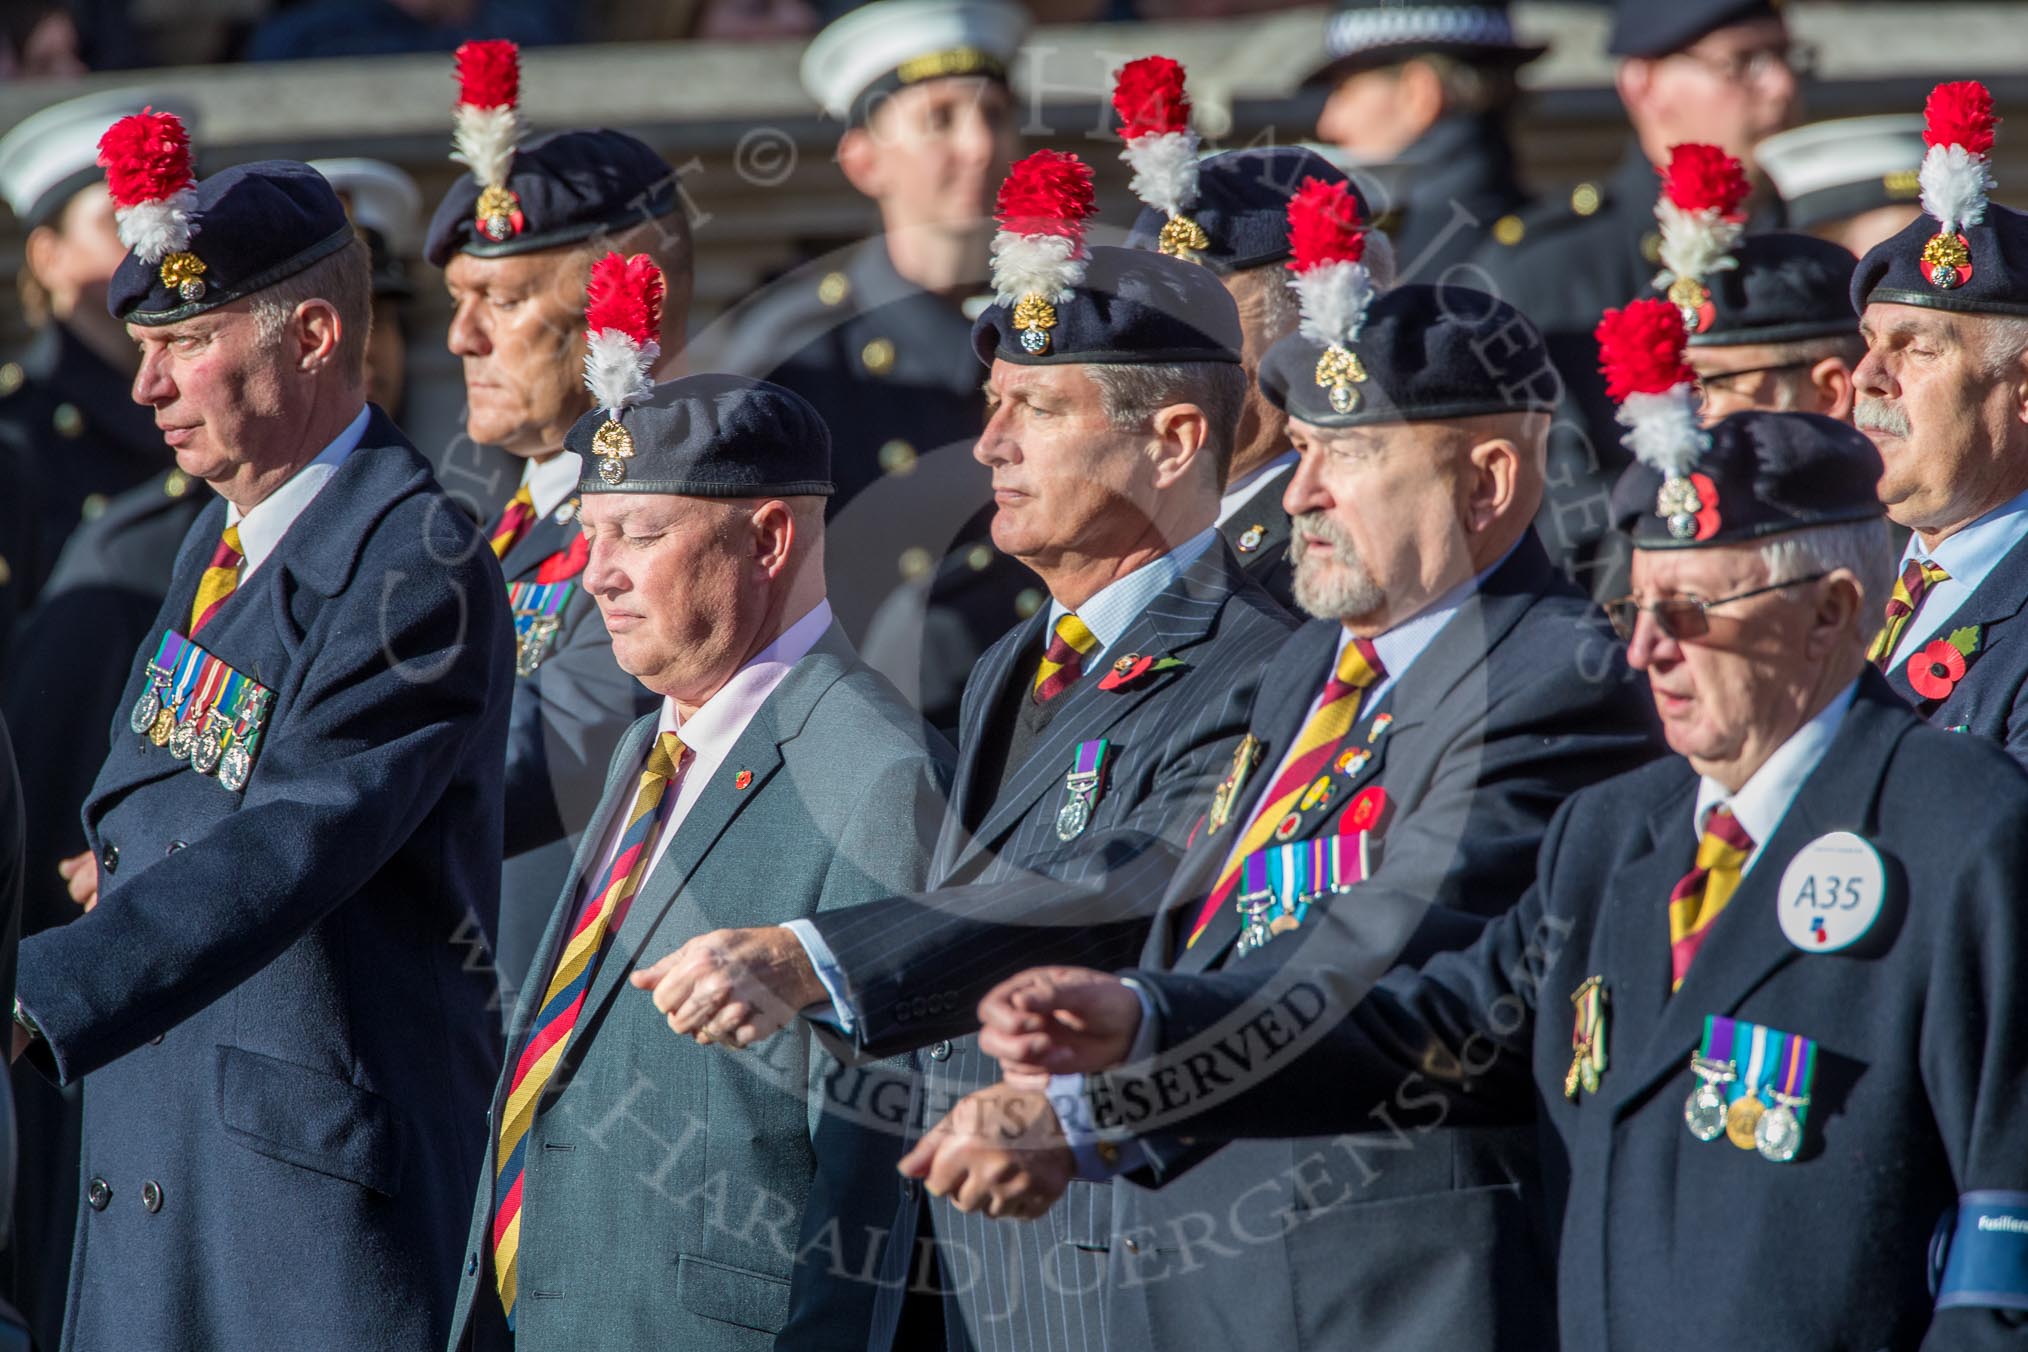 Fusiliers Association  Lancashire (Group A35, 34 members) Fusiliers Association  Lancashire (Group A35, 34 members) during the Royal British Legion March Past on Remembrance Sunday at the Cenotaph, Whitehall, Westminster, London, 11 November 2018, 12:02.